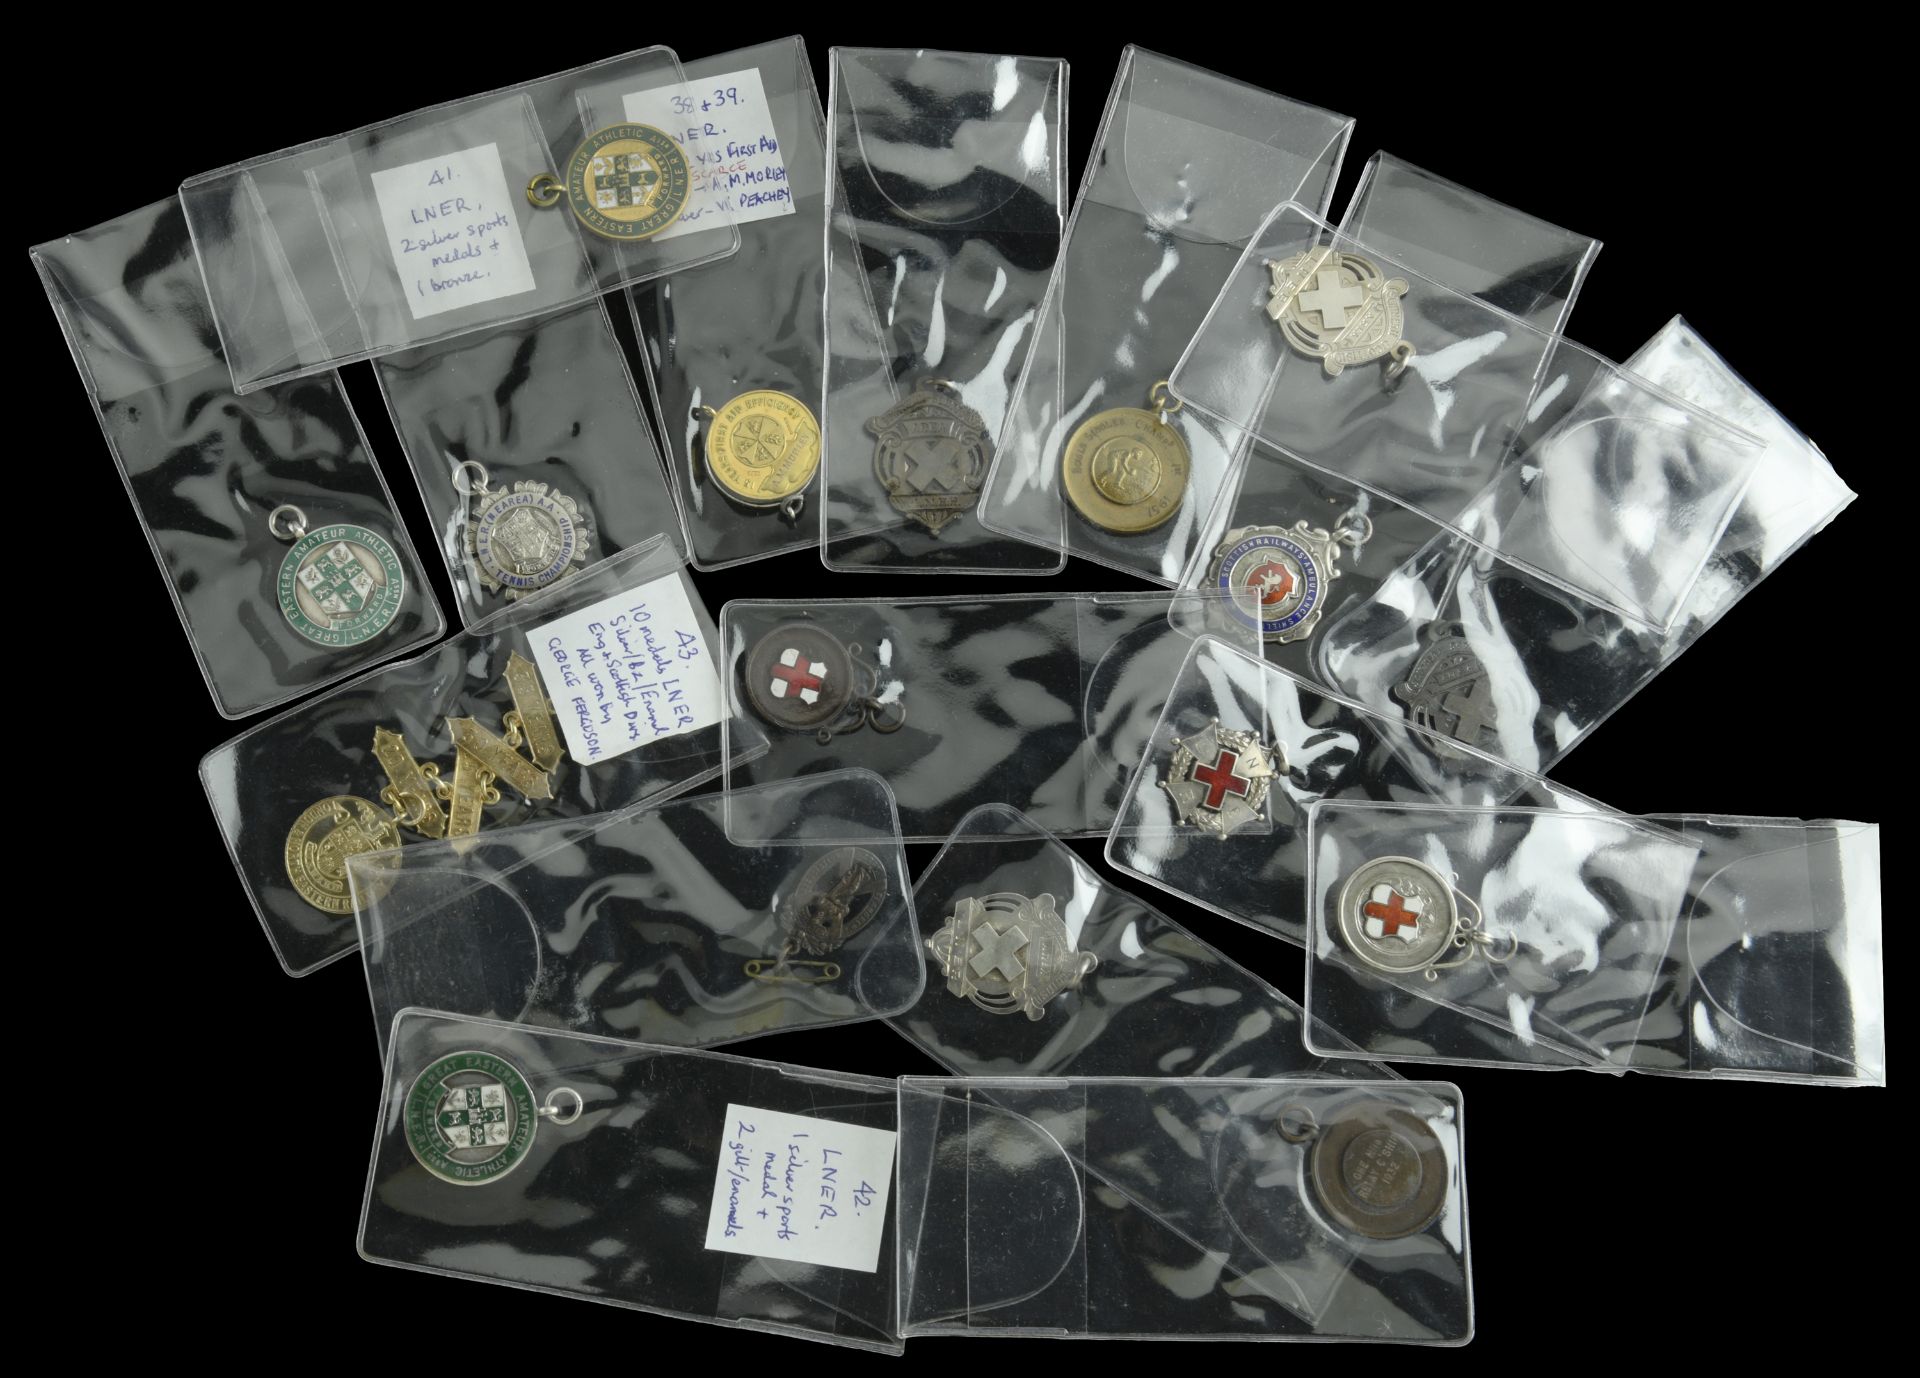 A Small Collection of Medals and Badges Related to Railways